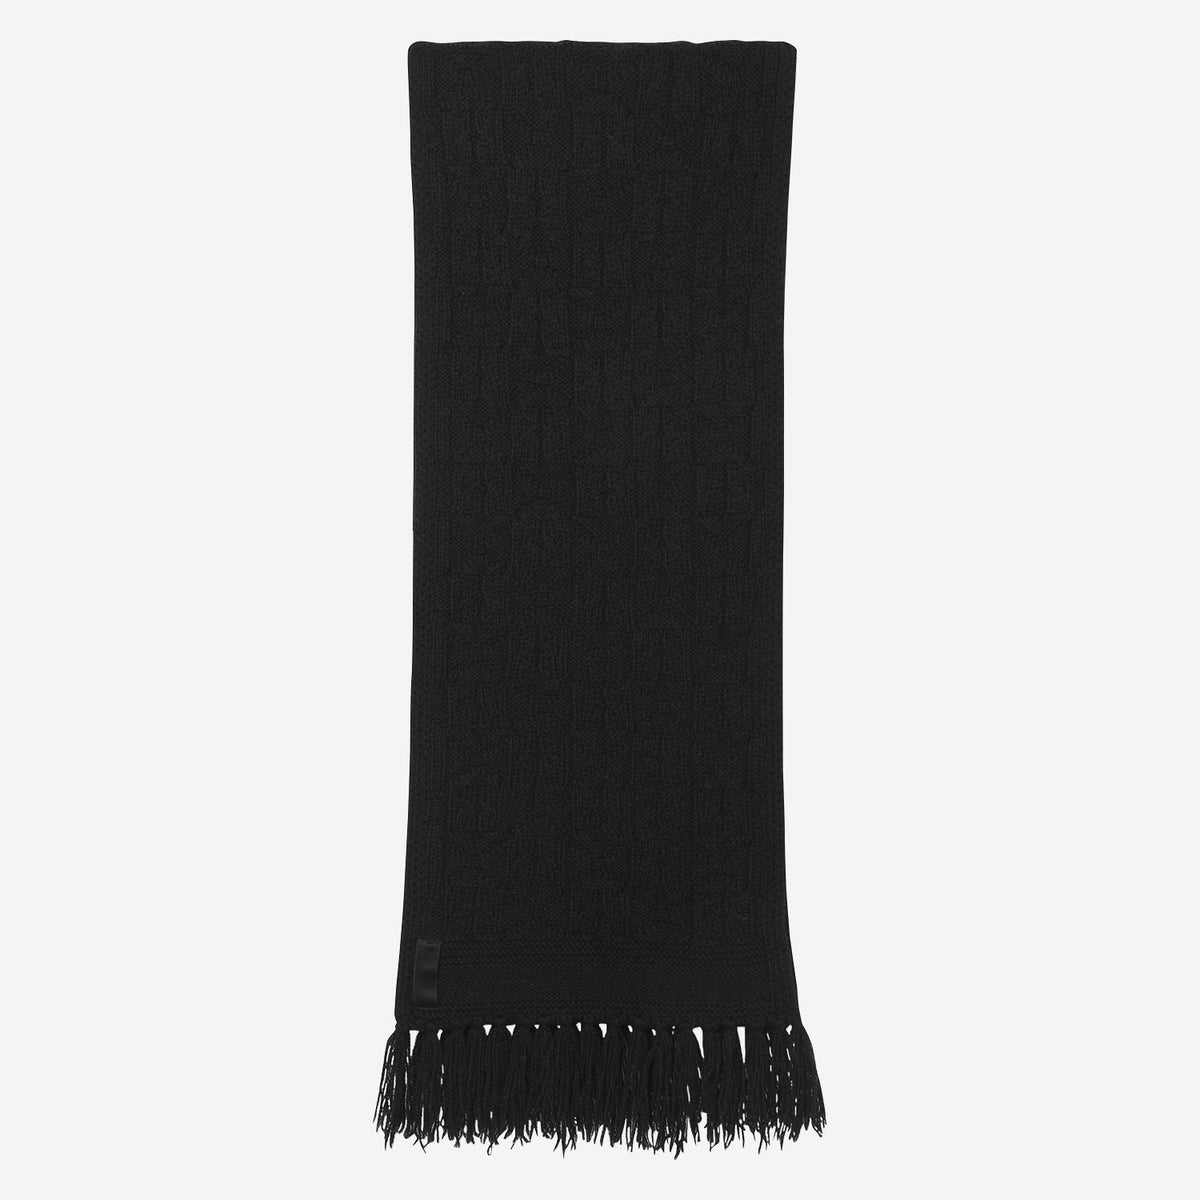 Knit Scarf / black – th products